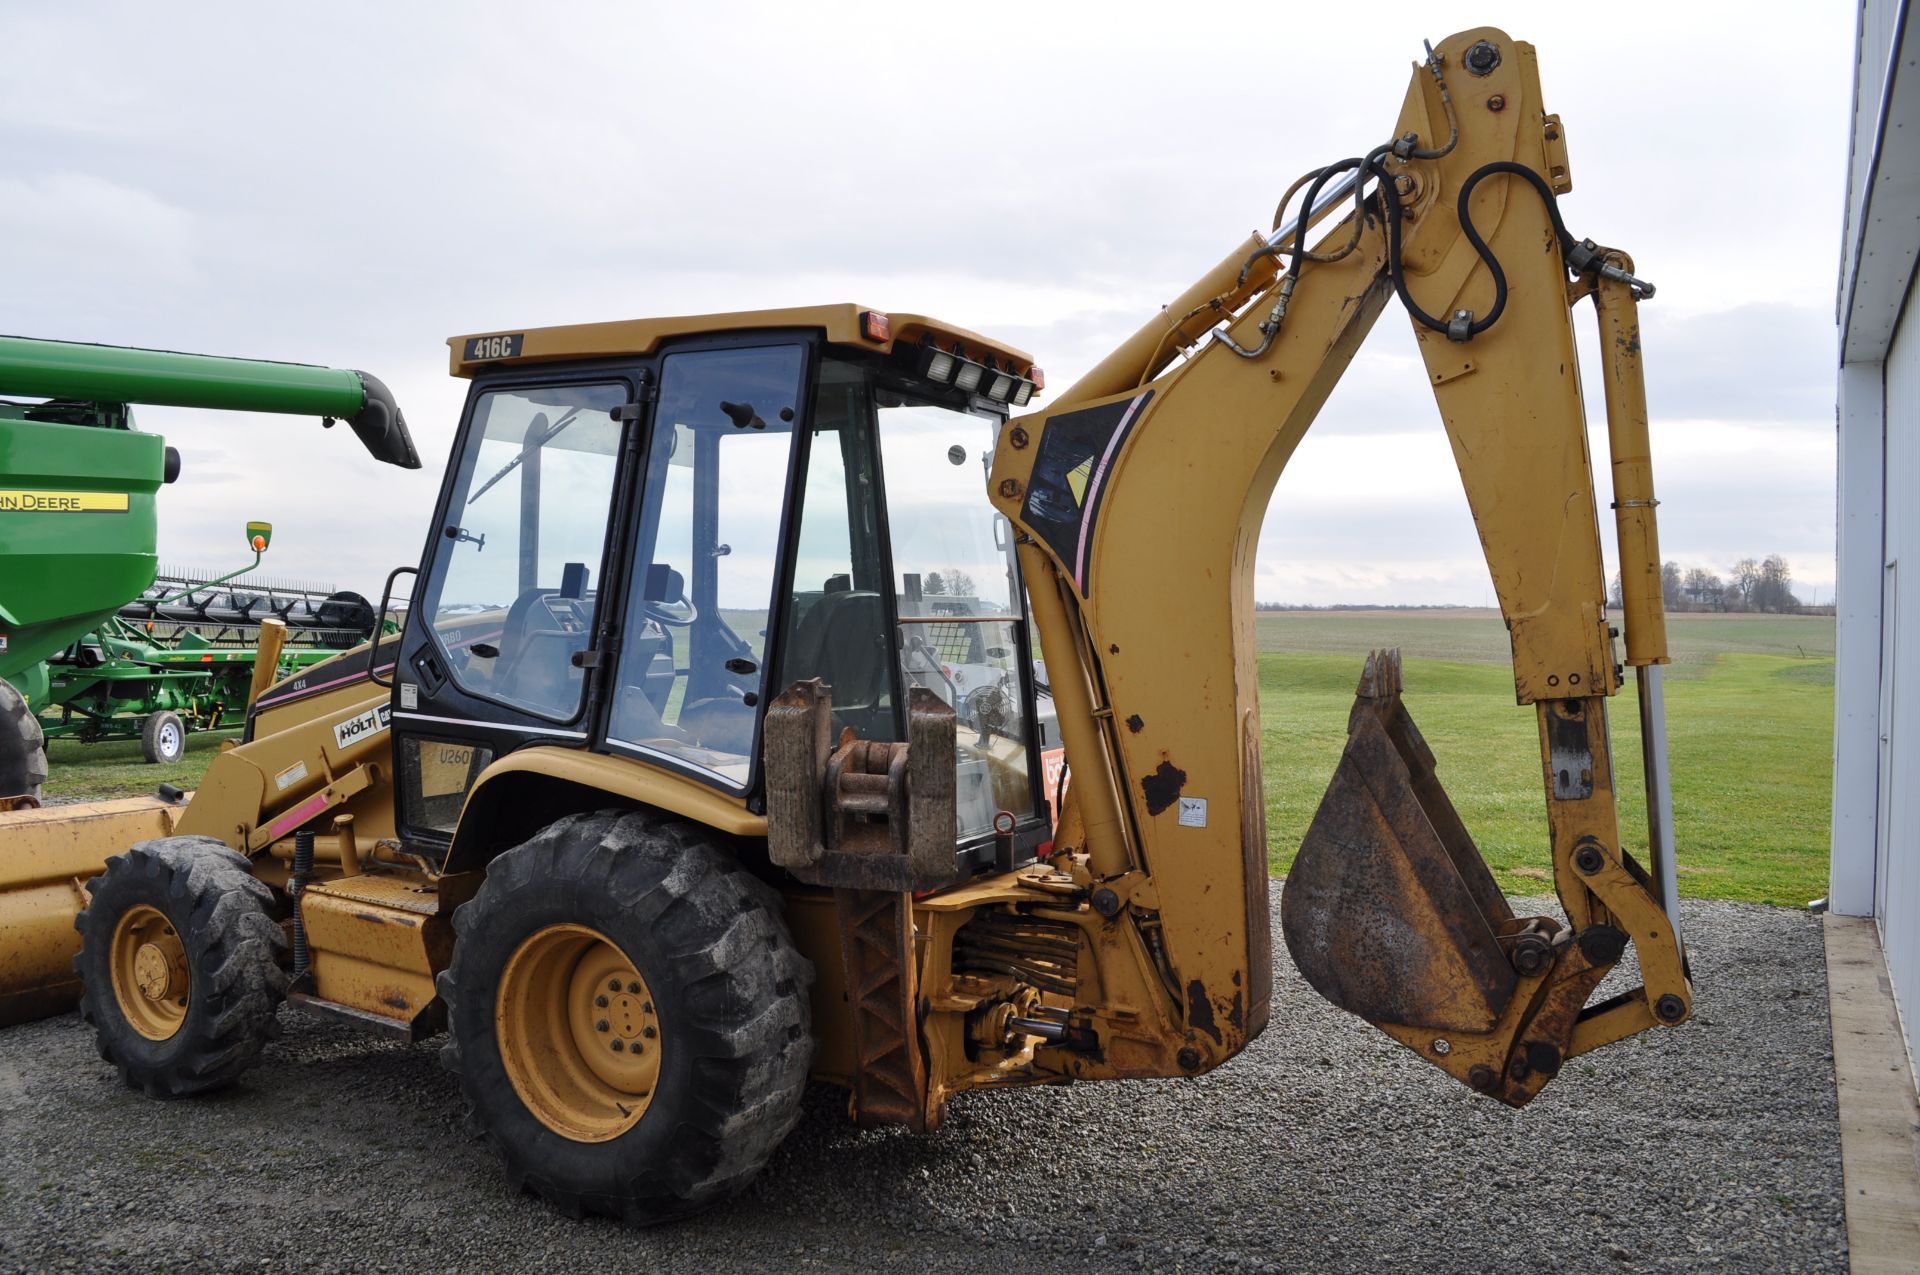 CAT 416C backhoe, 88” bucket, 19.5-24 rear, 12.5/80-18 front, 4x4, 18” and 24” digging buckets - Image 4 of 35